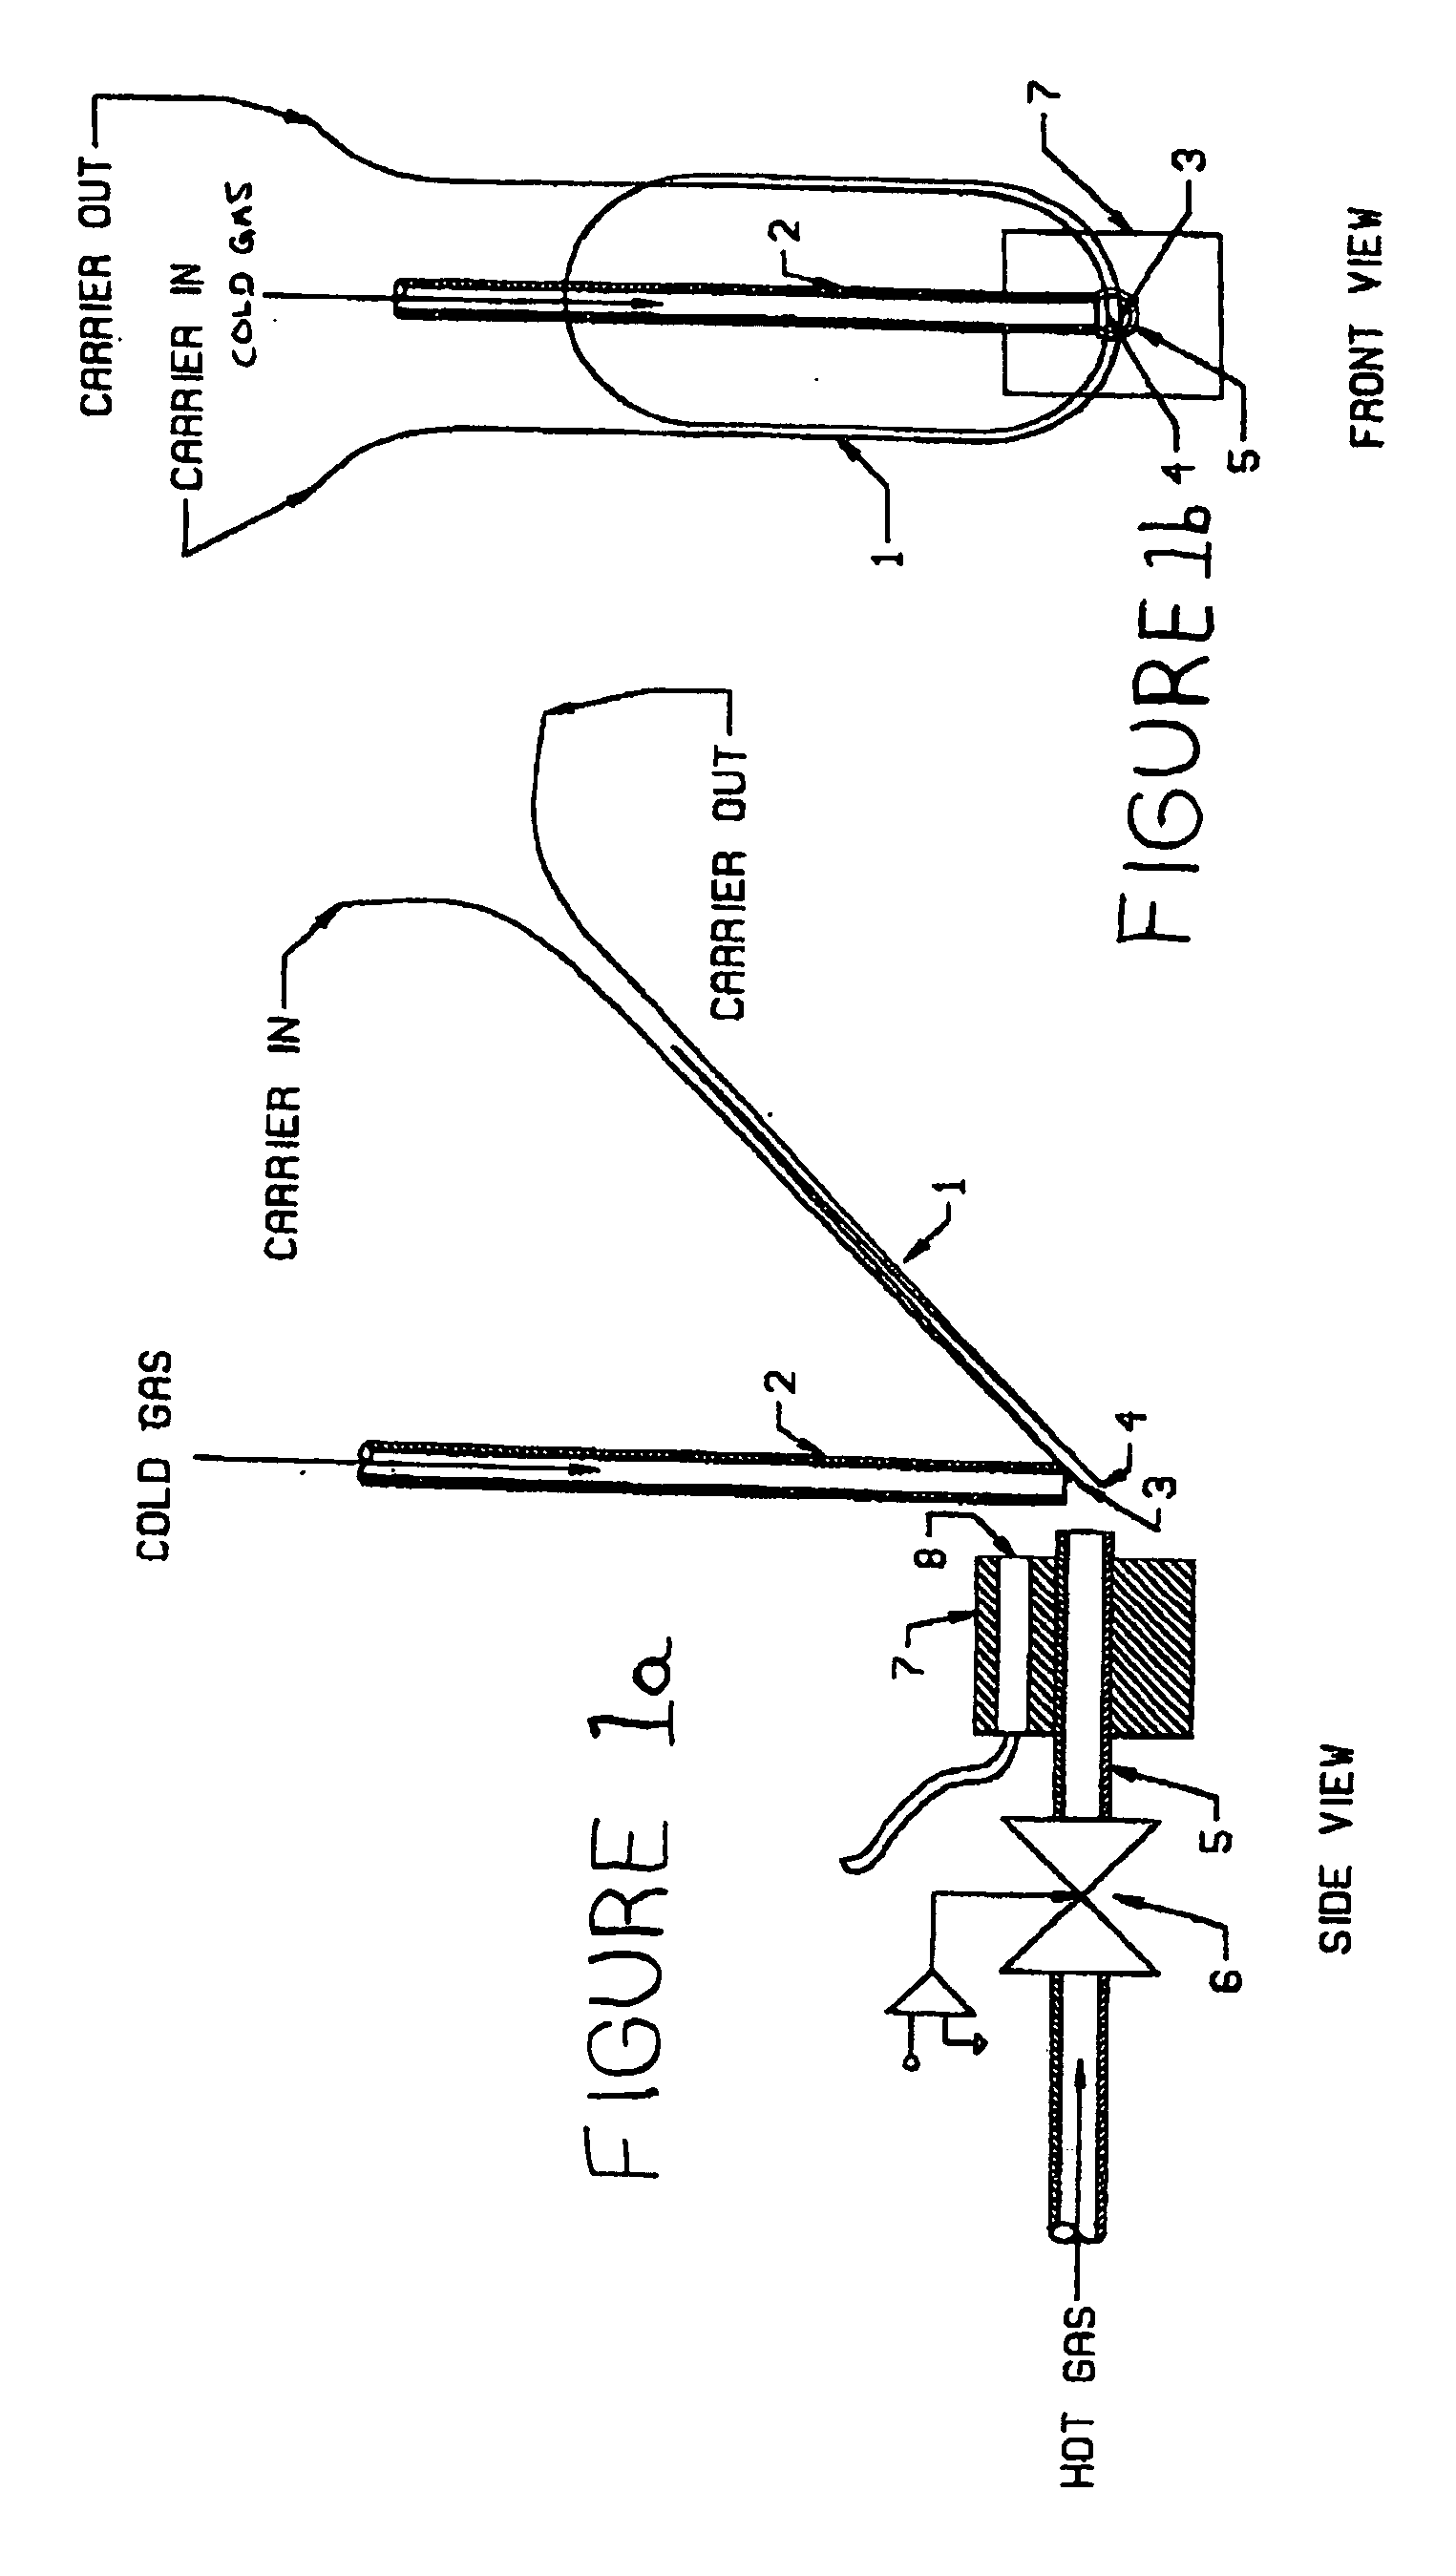 Method and apparatus for measuring velocity of chromatagraphic pulse